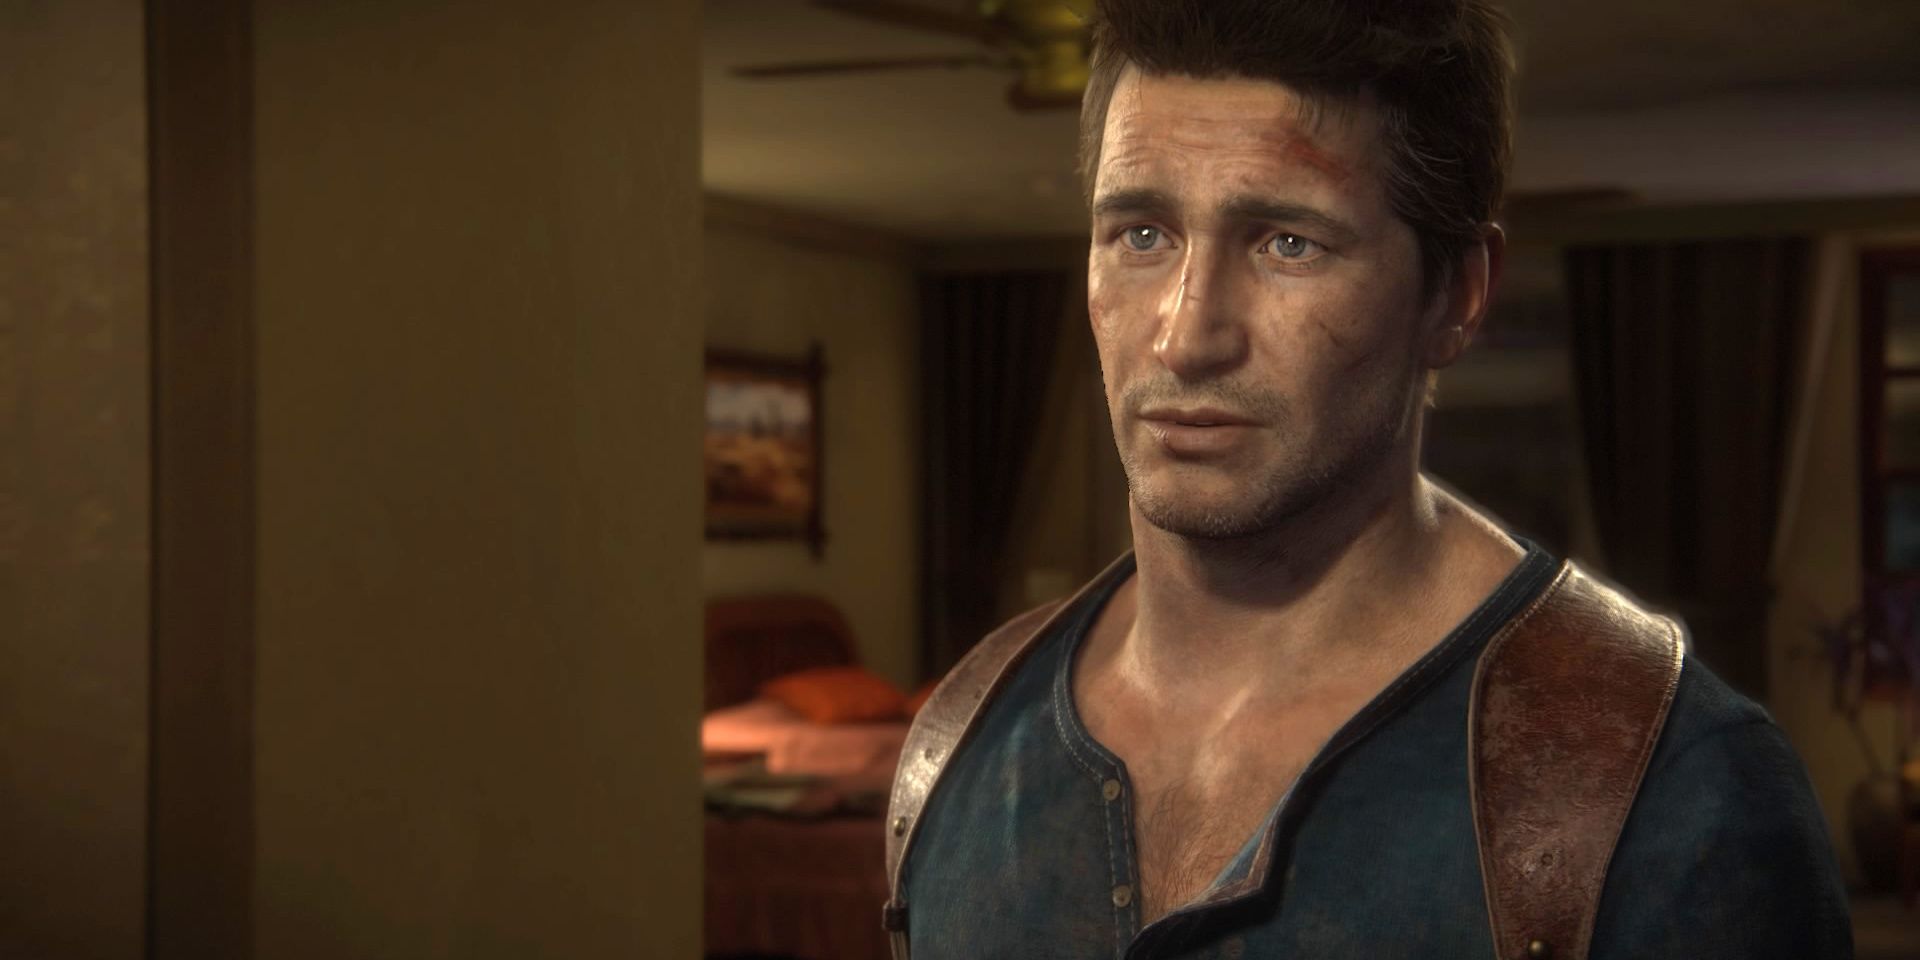 Nate looking sad and teary eyed in Uncharted 4 